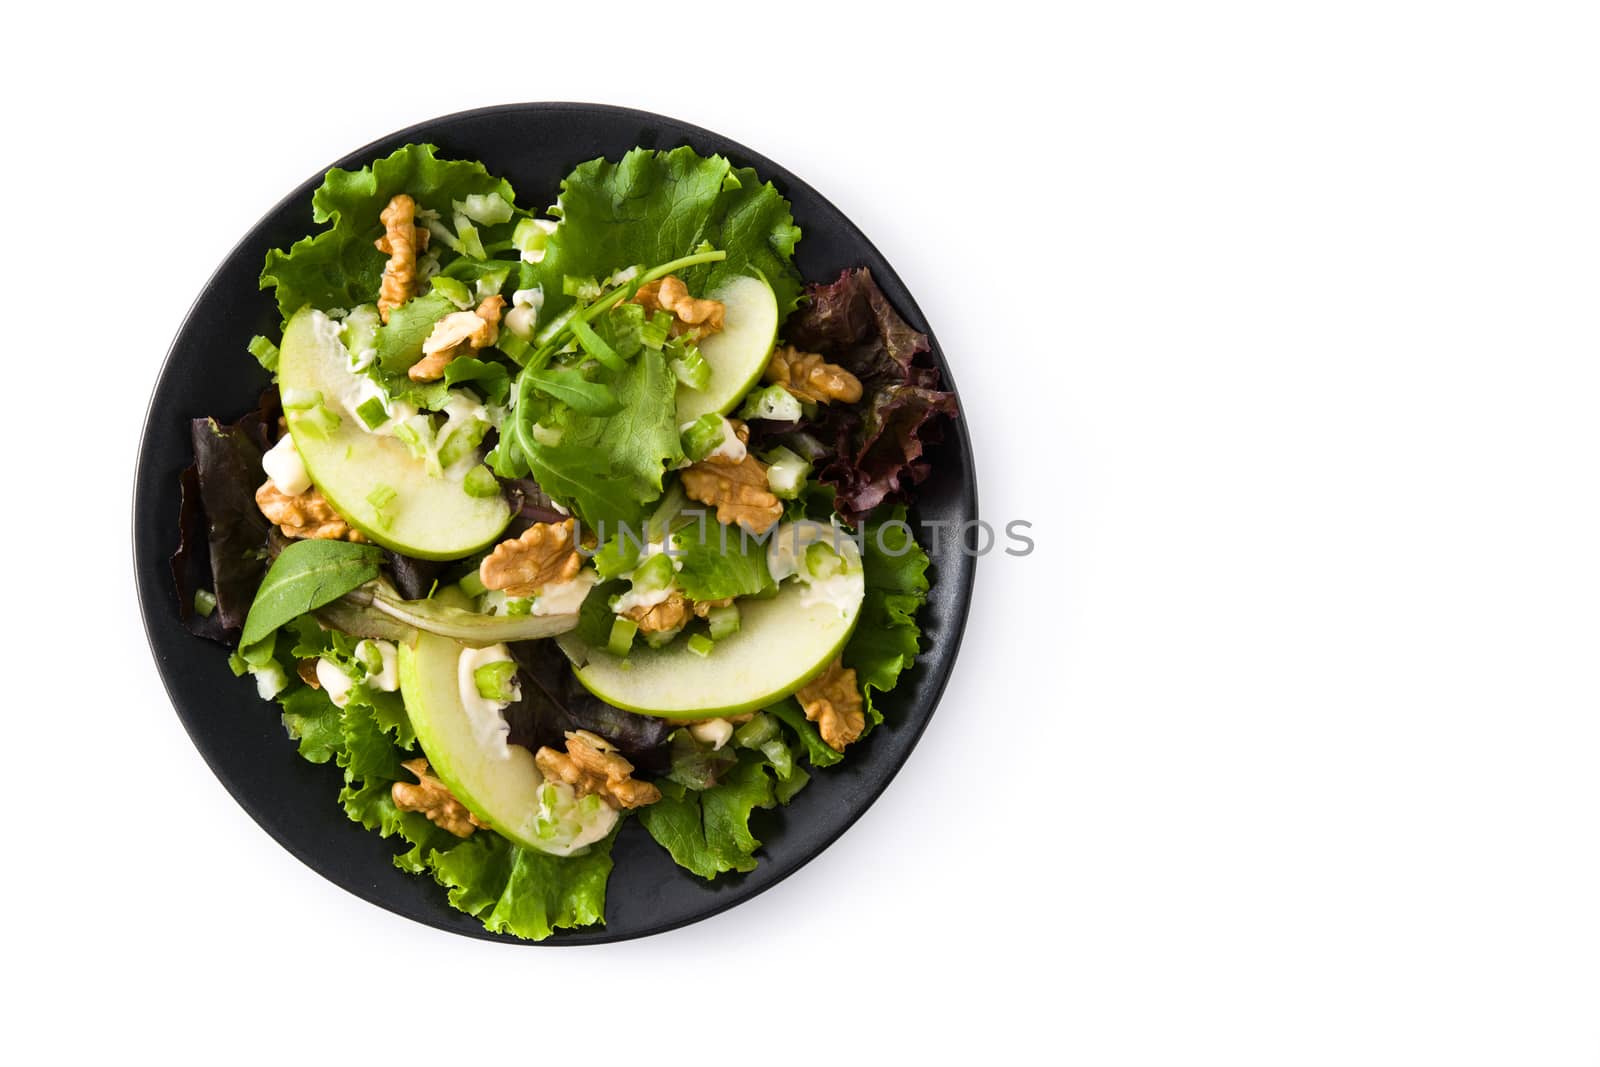 Fresh Waldorf salad with lettuce, green apples, walnuts and celery isolated on white background